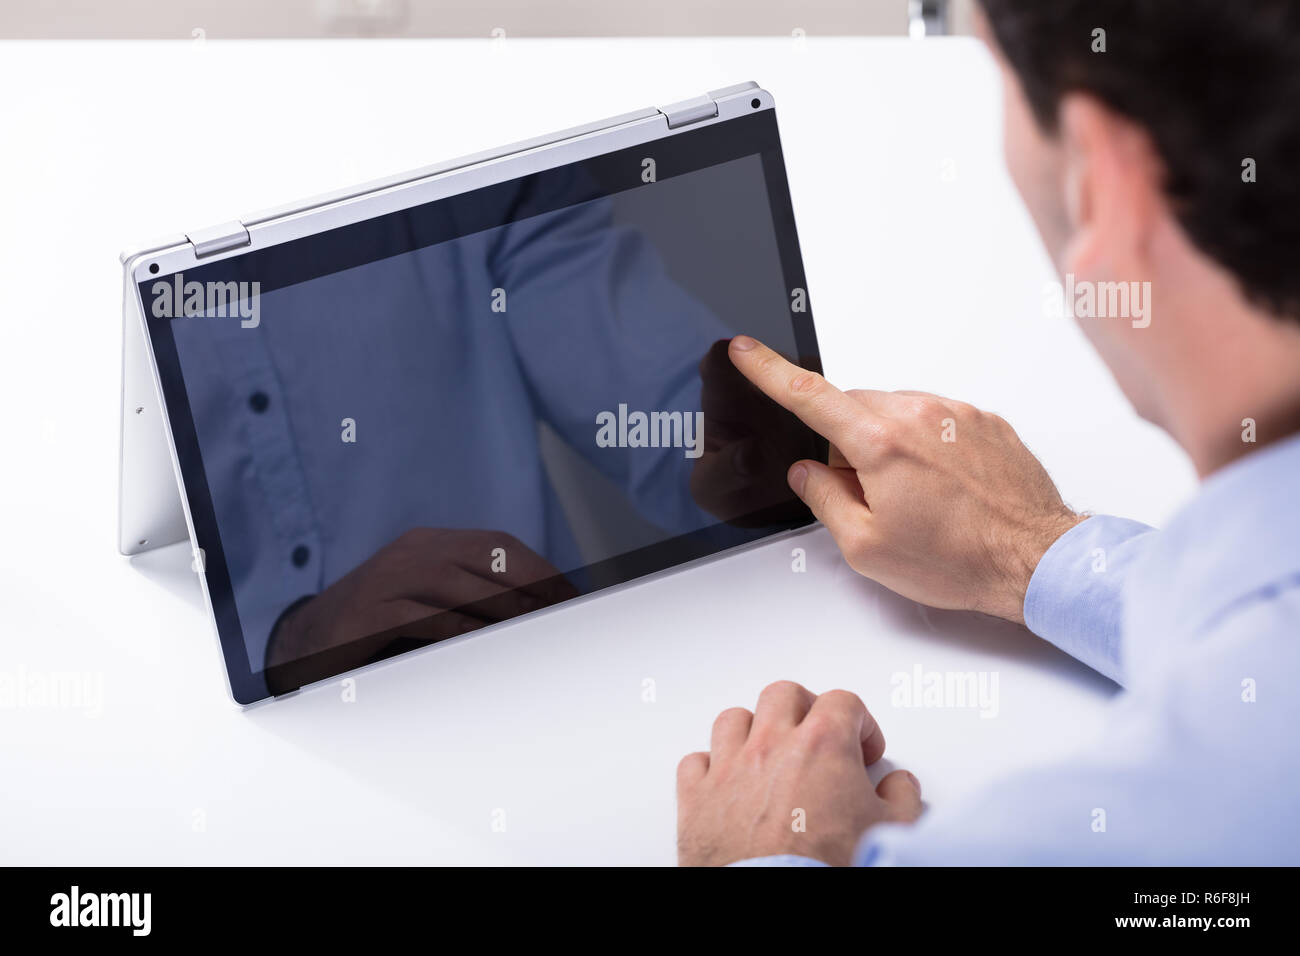 Man Touching Hybrid Laptop Screen With Finger Stock Photo